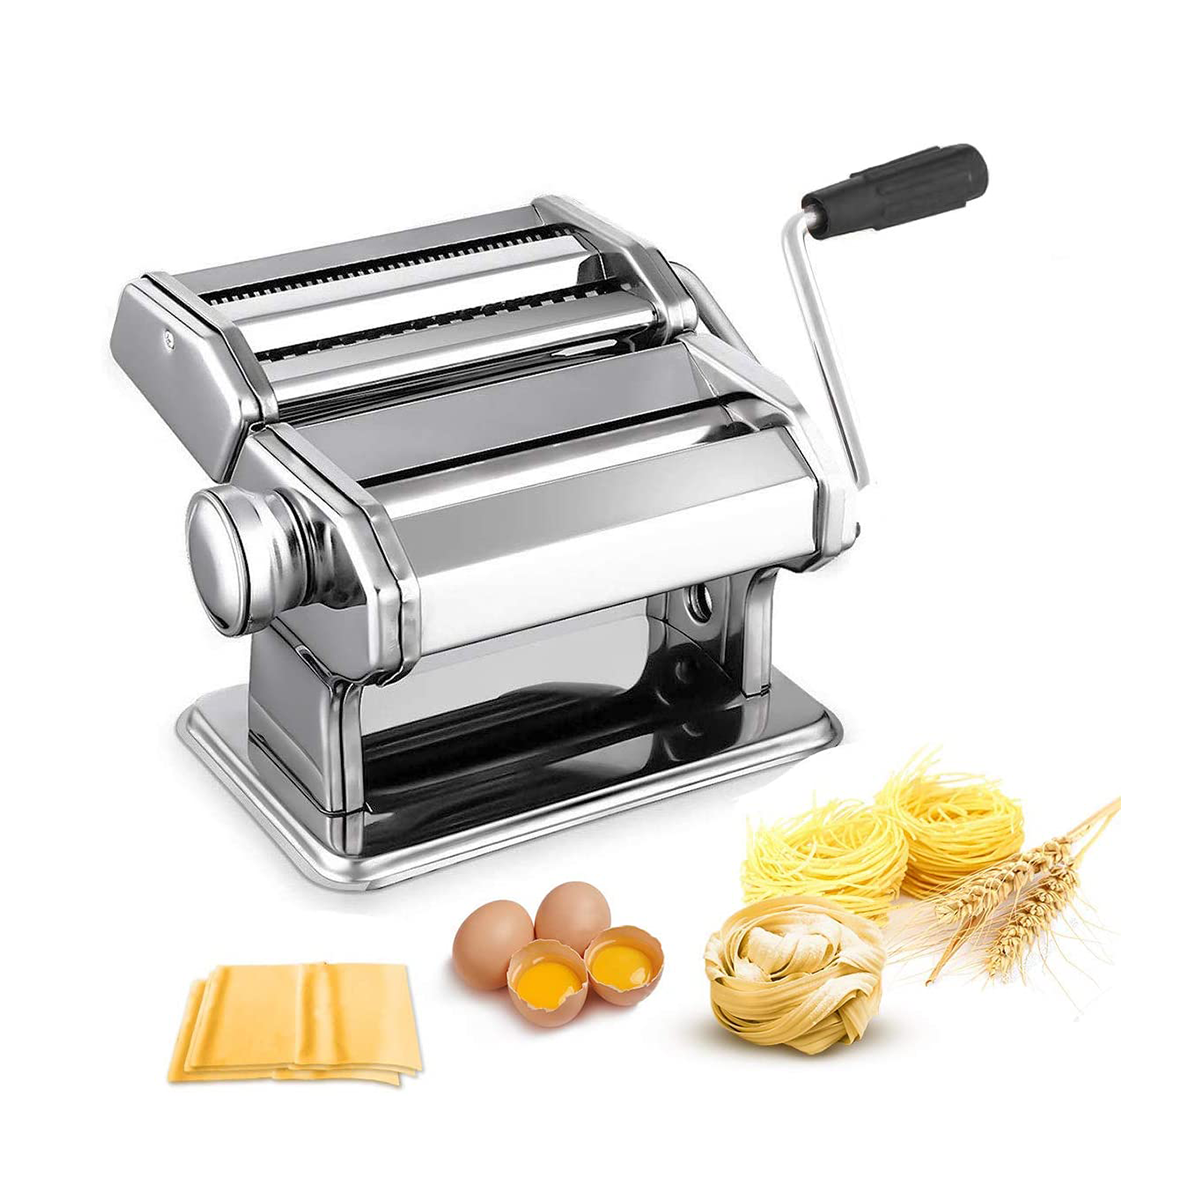 3 Blade Manual Pasta Machine Noodle Maker Stainless Steel Dough